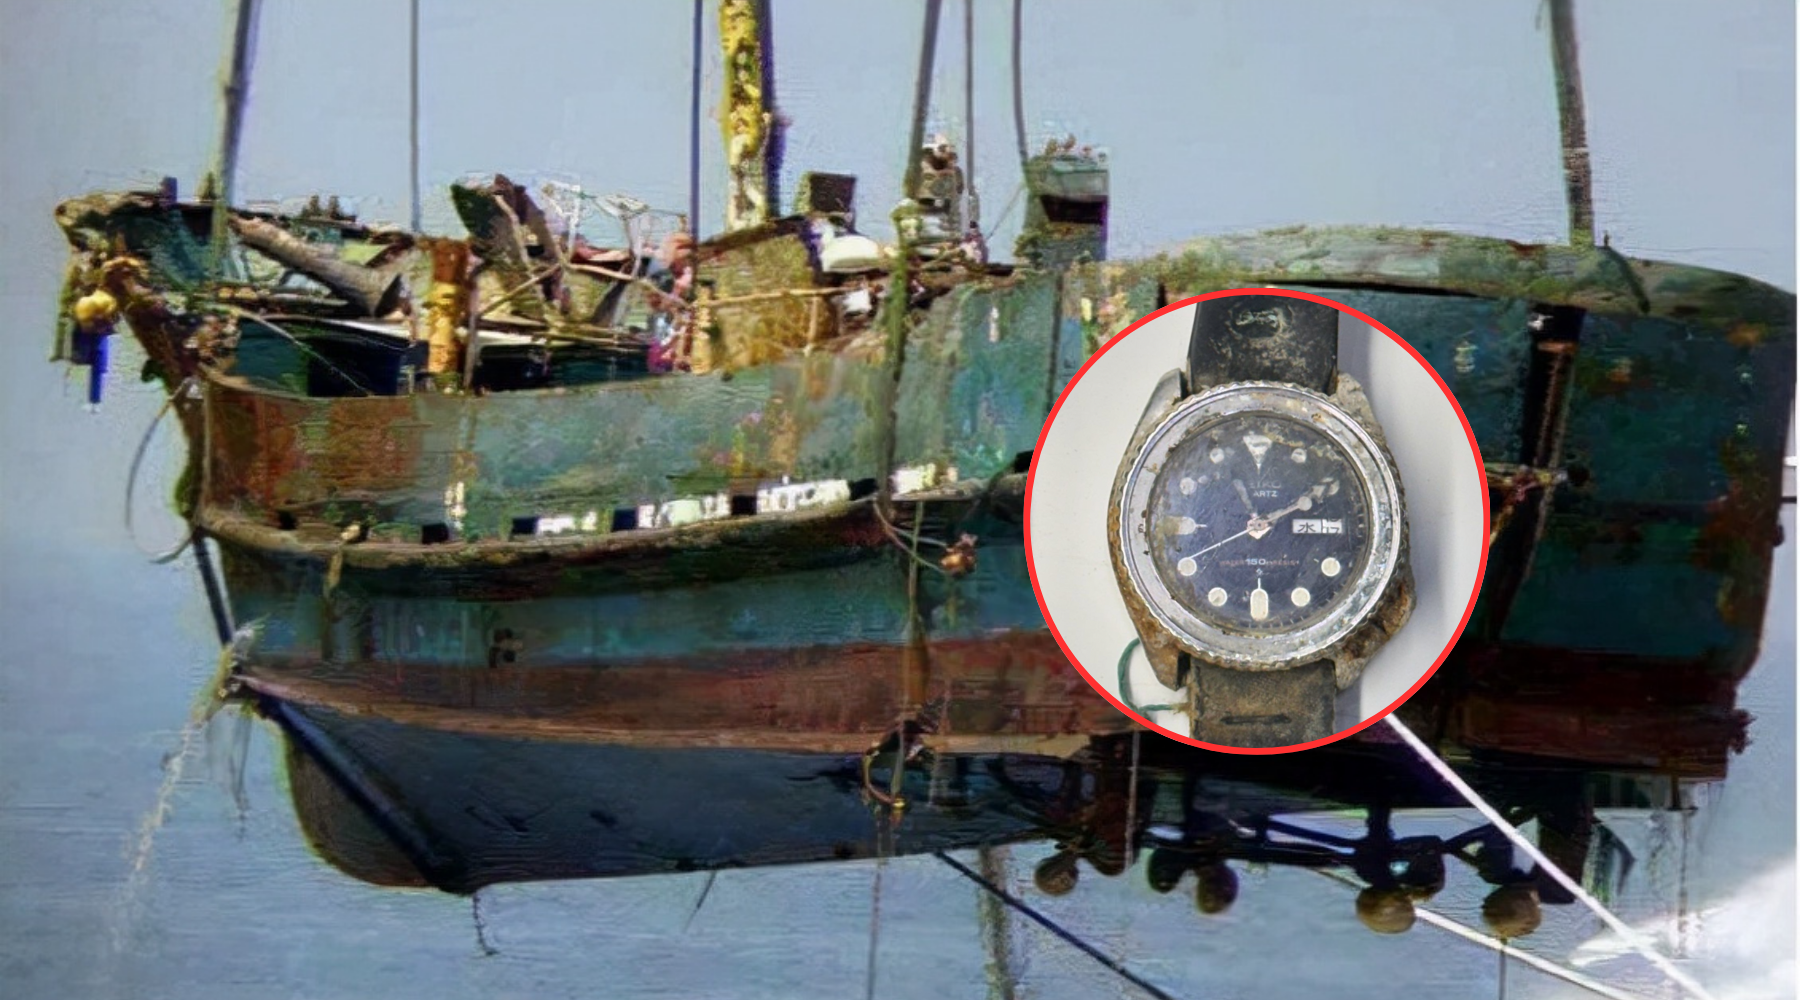 The Seiko Found In The Wreckage Of A Spy Ship And North Korean Covert Operations